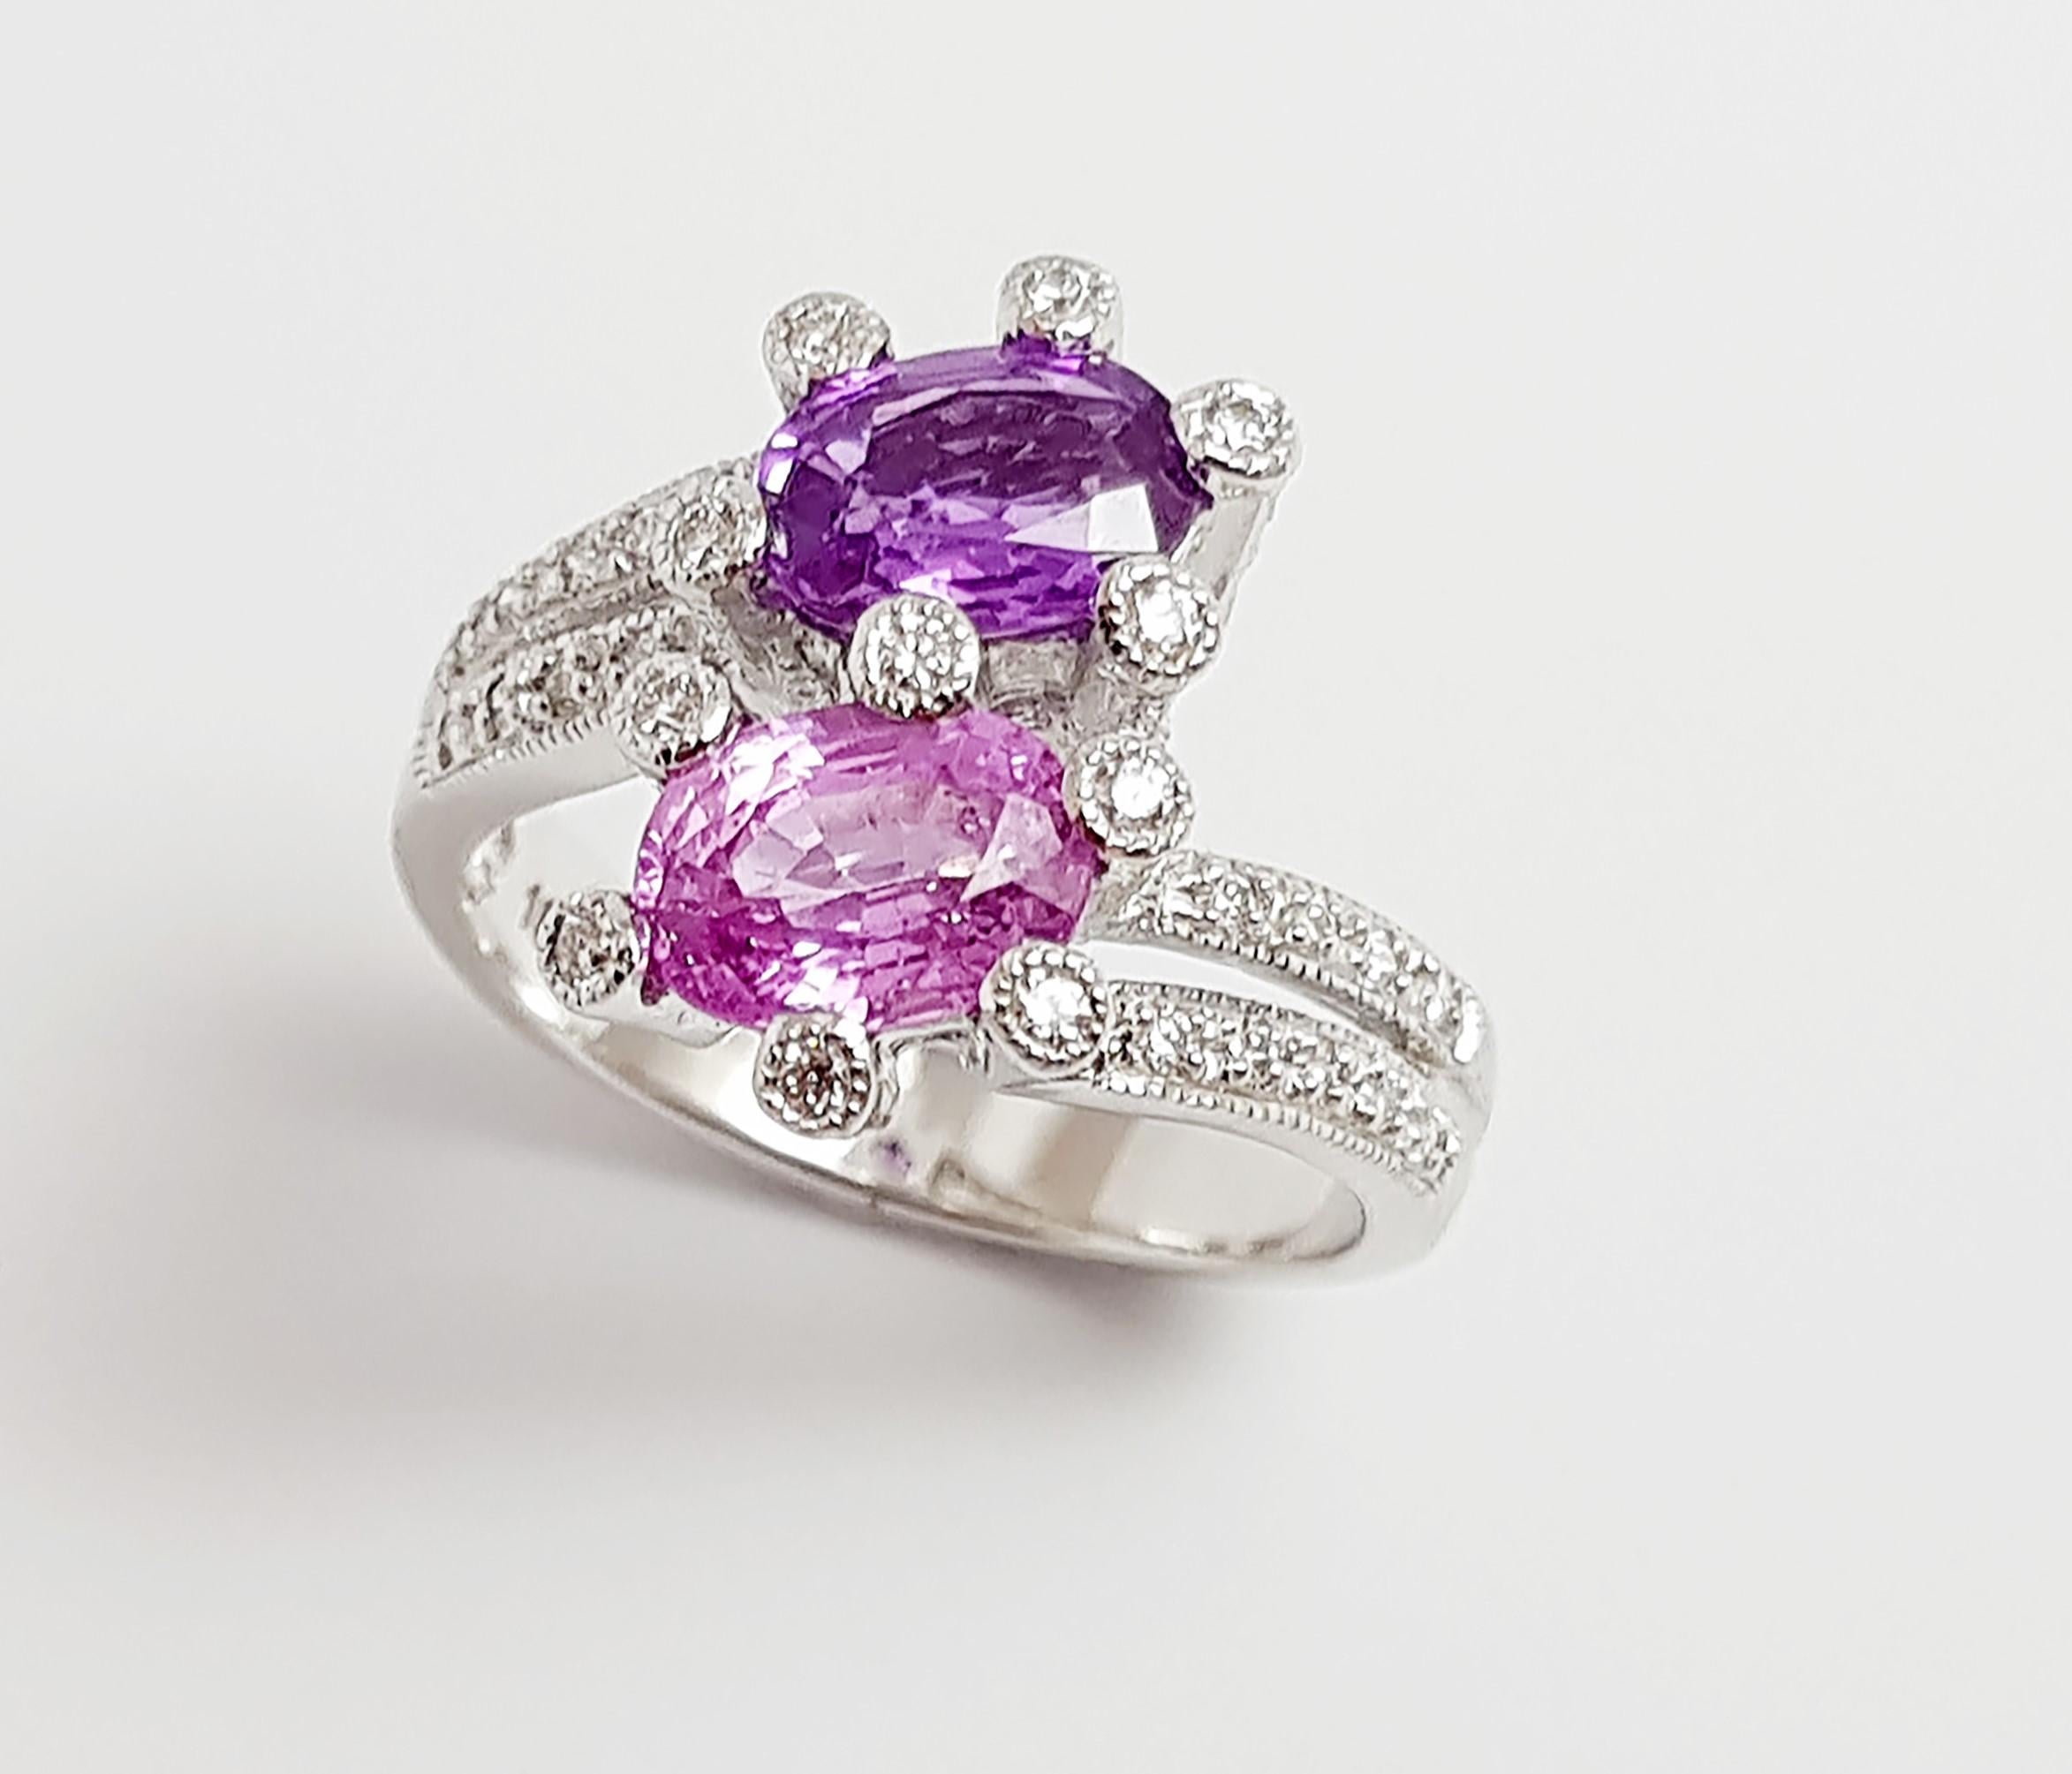 Pink Sapphire 1.24 carats and Purple Sapphire 0.88 carat with Diamond 0.33 carat Ring set in 18 Karat White Gold Settings

Width:  0.9 cm 
Length: 1.3 cm
Ring Size: 52
Total Weight: 6.4 grams

